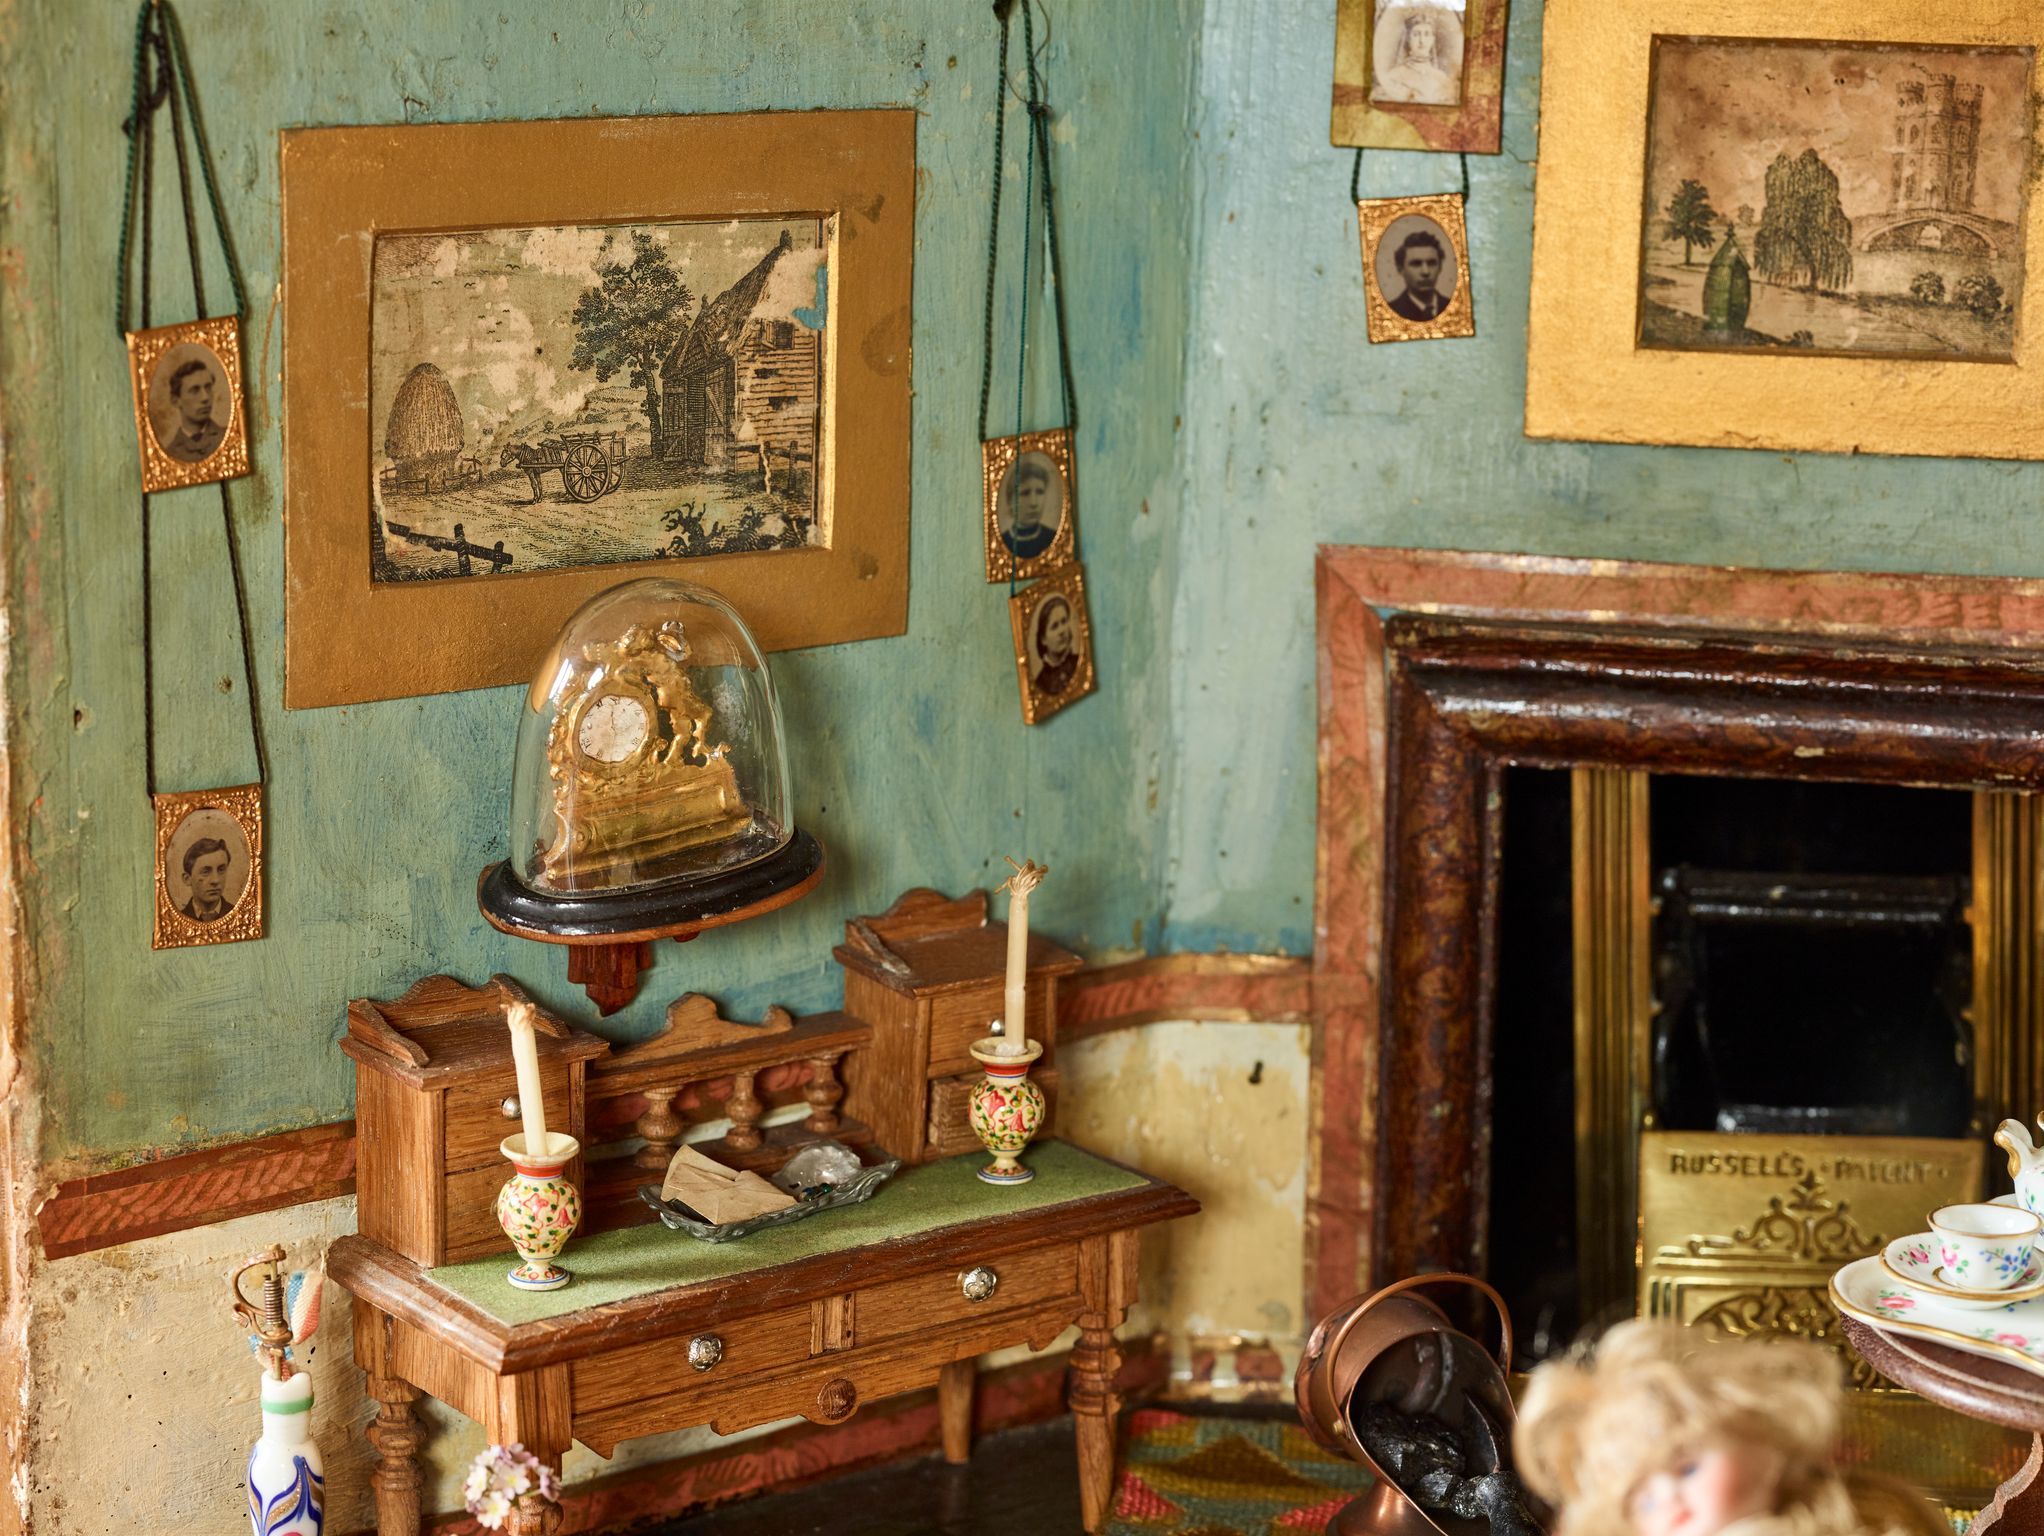 The Evans Dollhouse will go under the hammer on February 24.  Photo credit: Lyon & Turnbull.